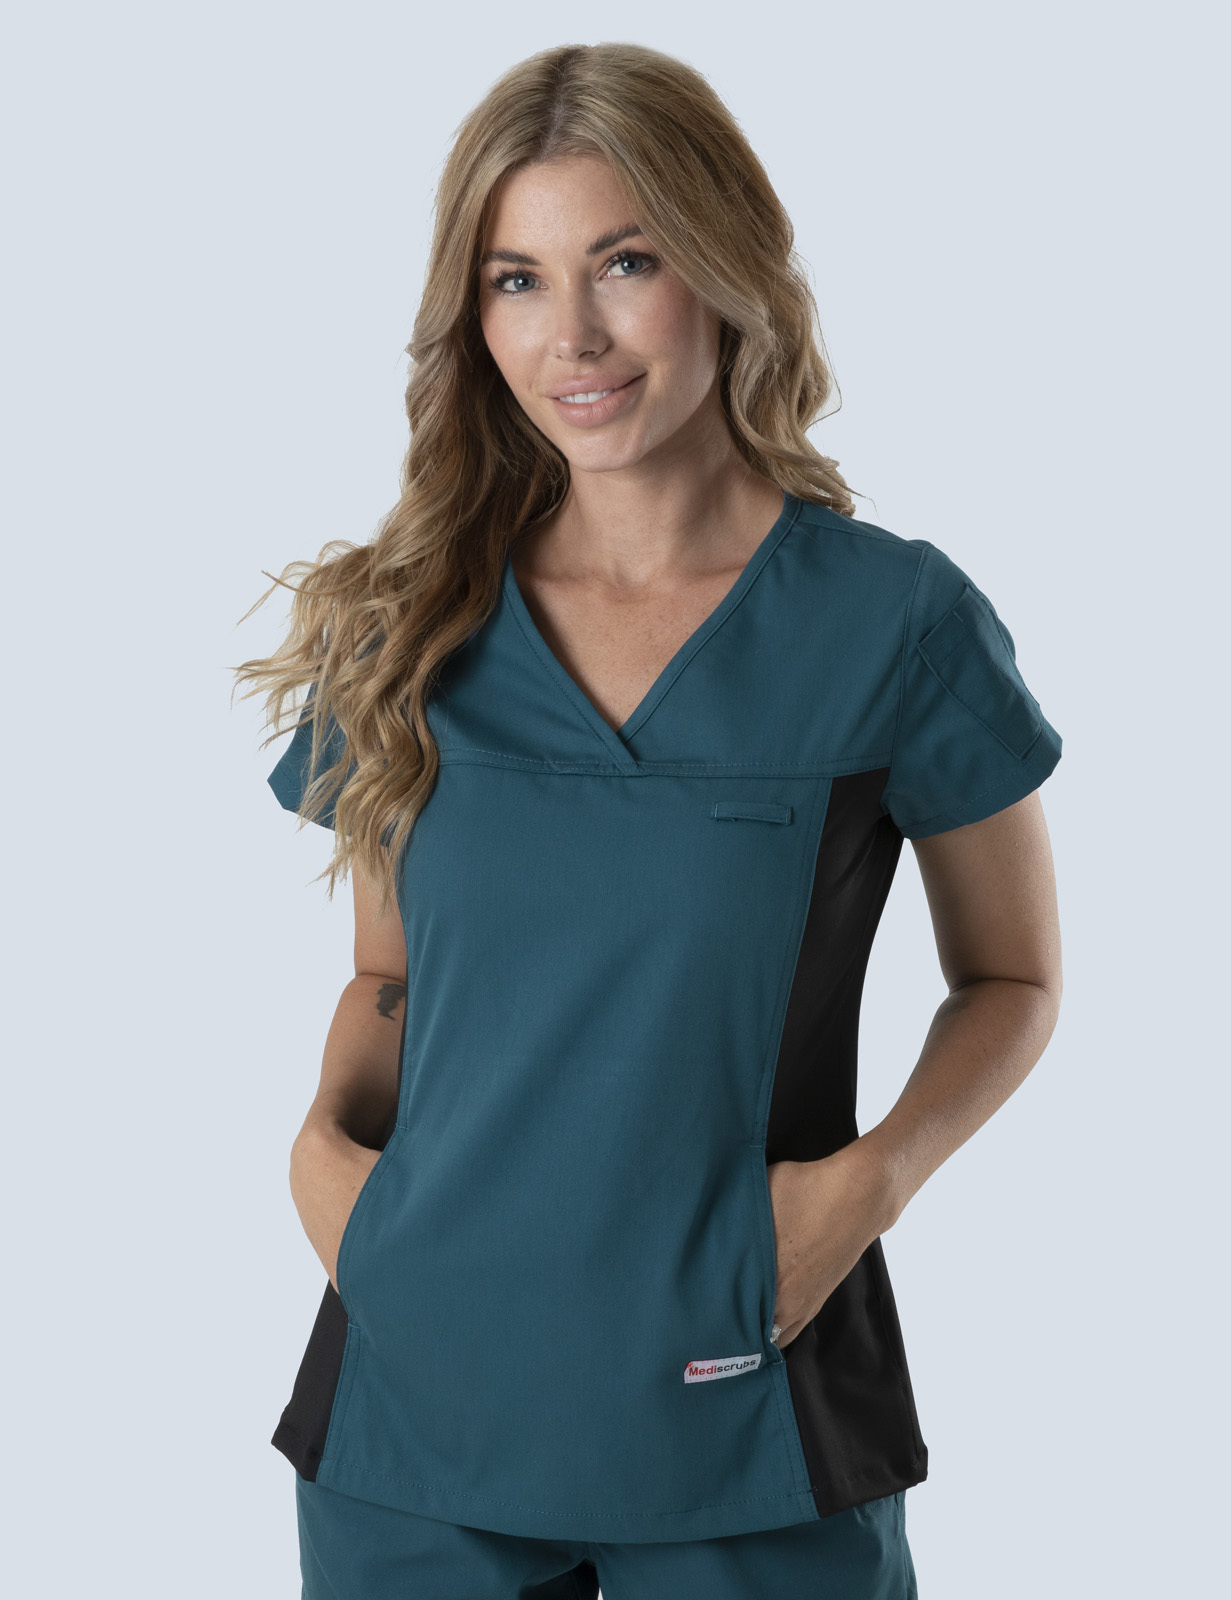 Women's Fit Solid Scrub Top With Spandex Panel - Caribbean - XX Small